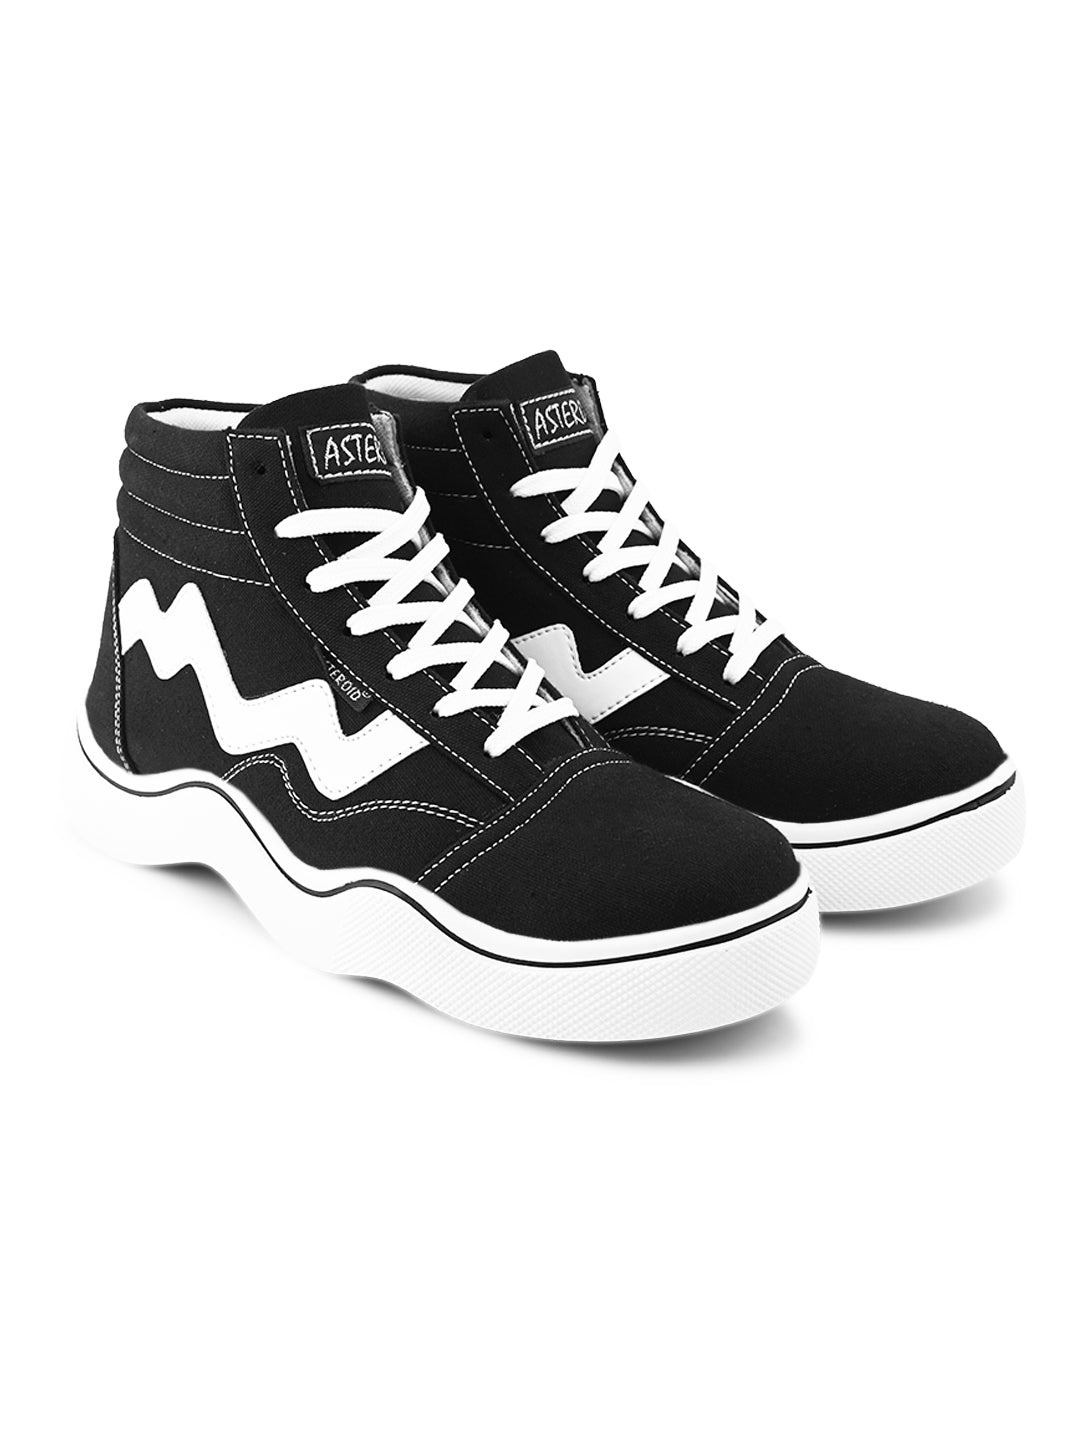 ASTEROID Canvas Premium  Partywear Casual Boot.